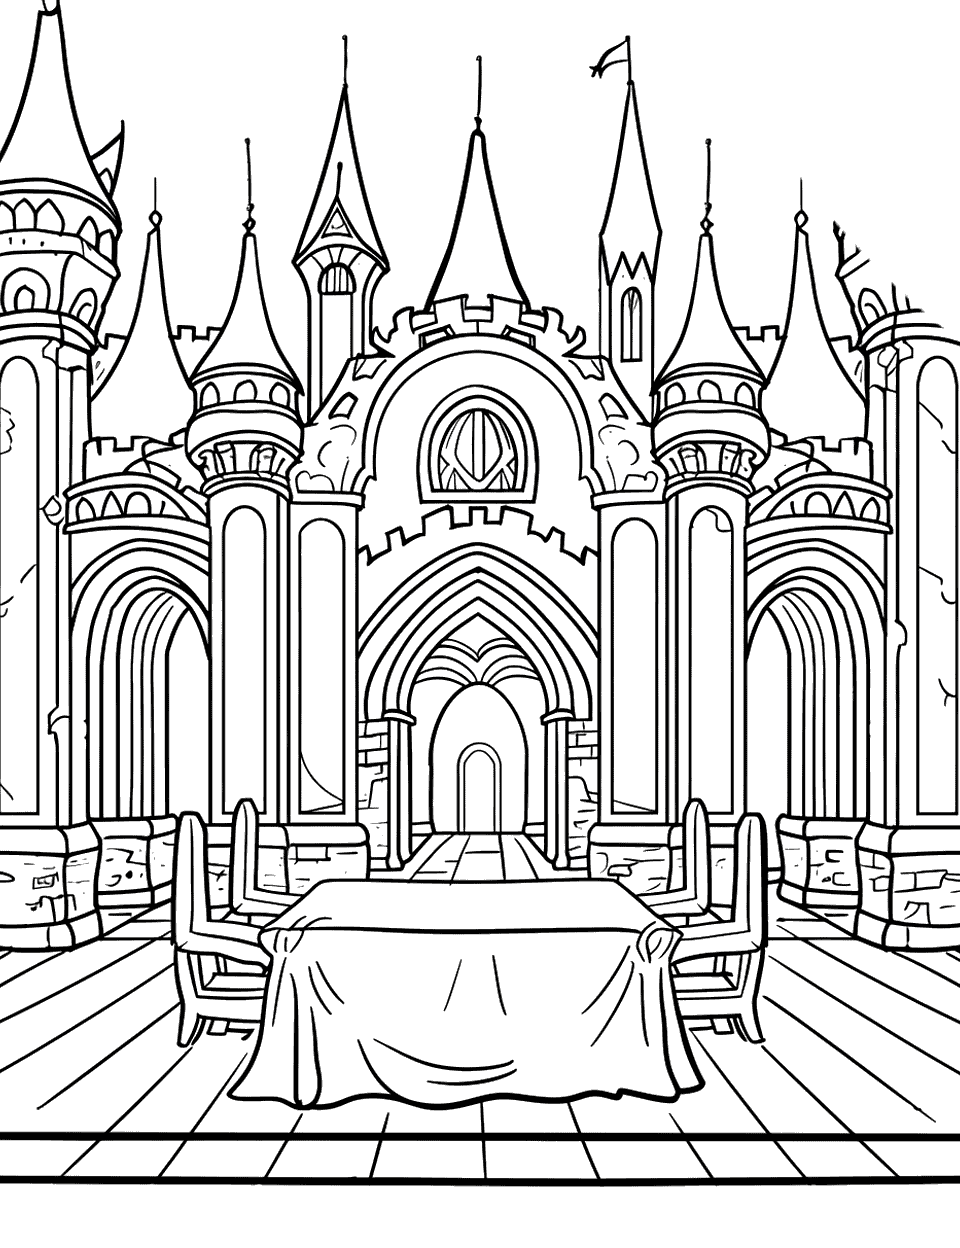 King's Banquet Hall Castle Coloring Page - Inside a grand castle hall where a feast is set up for the king and his guests.